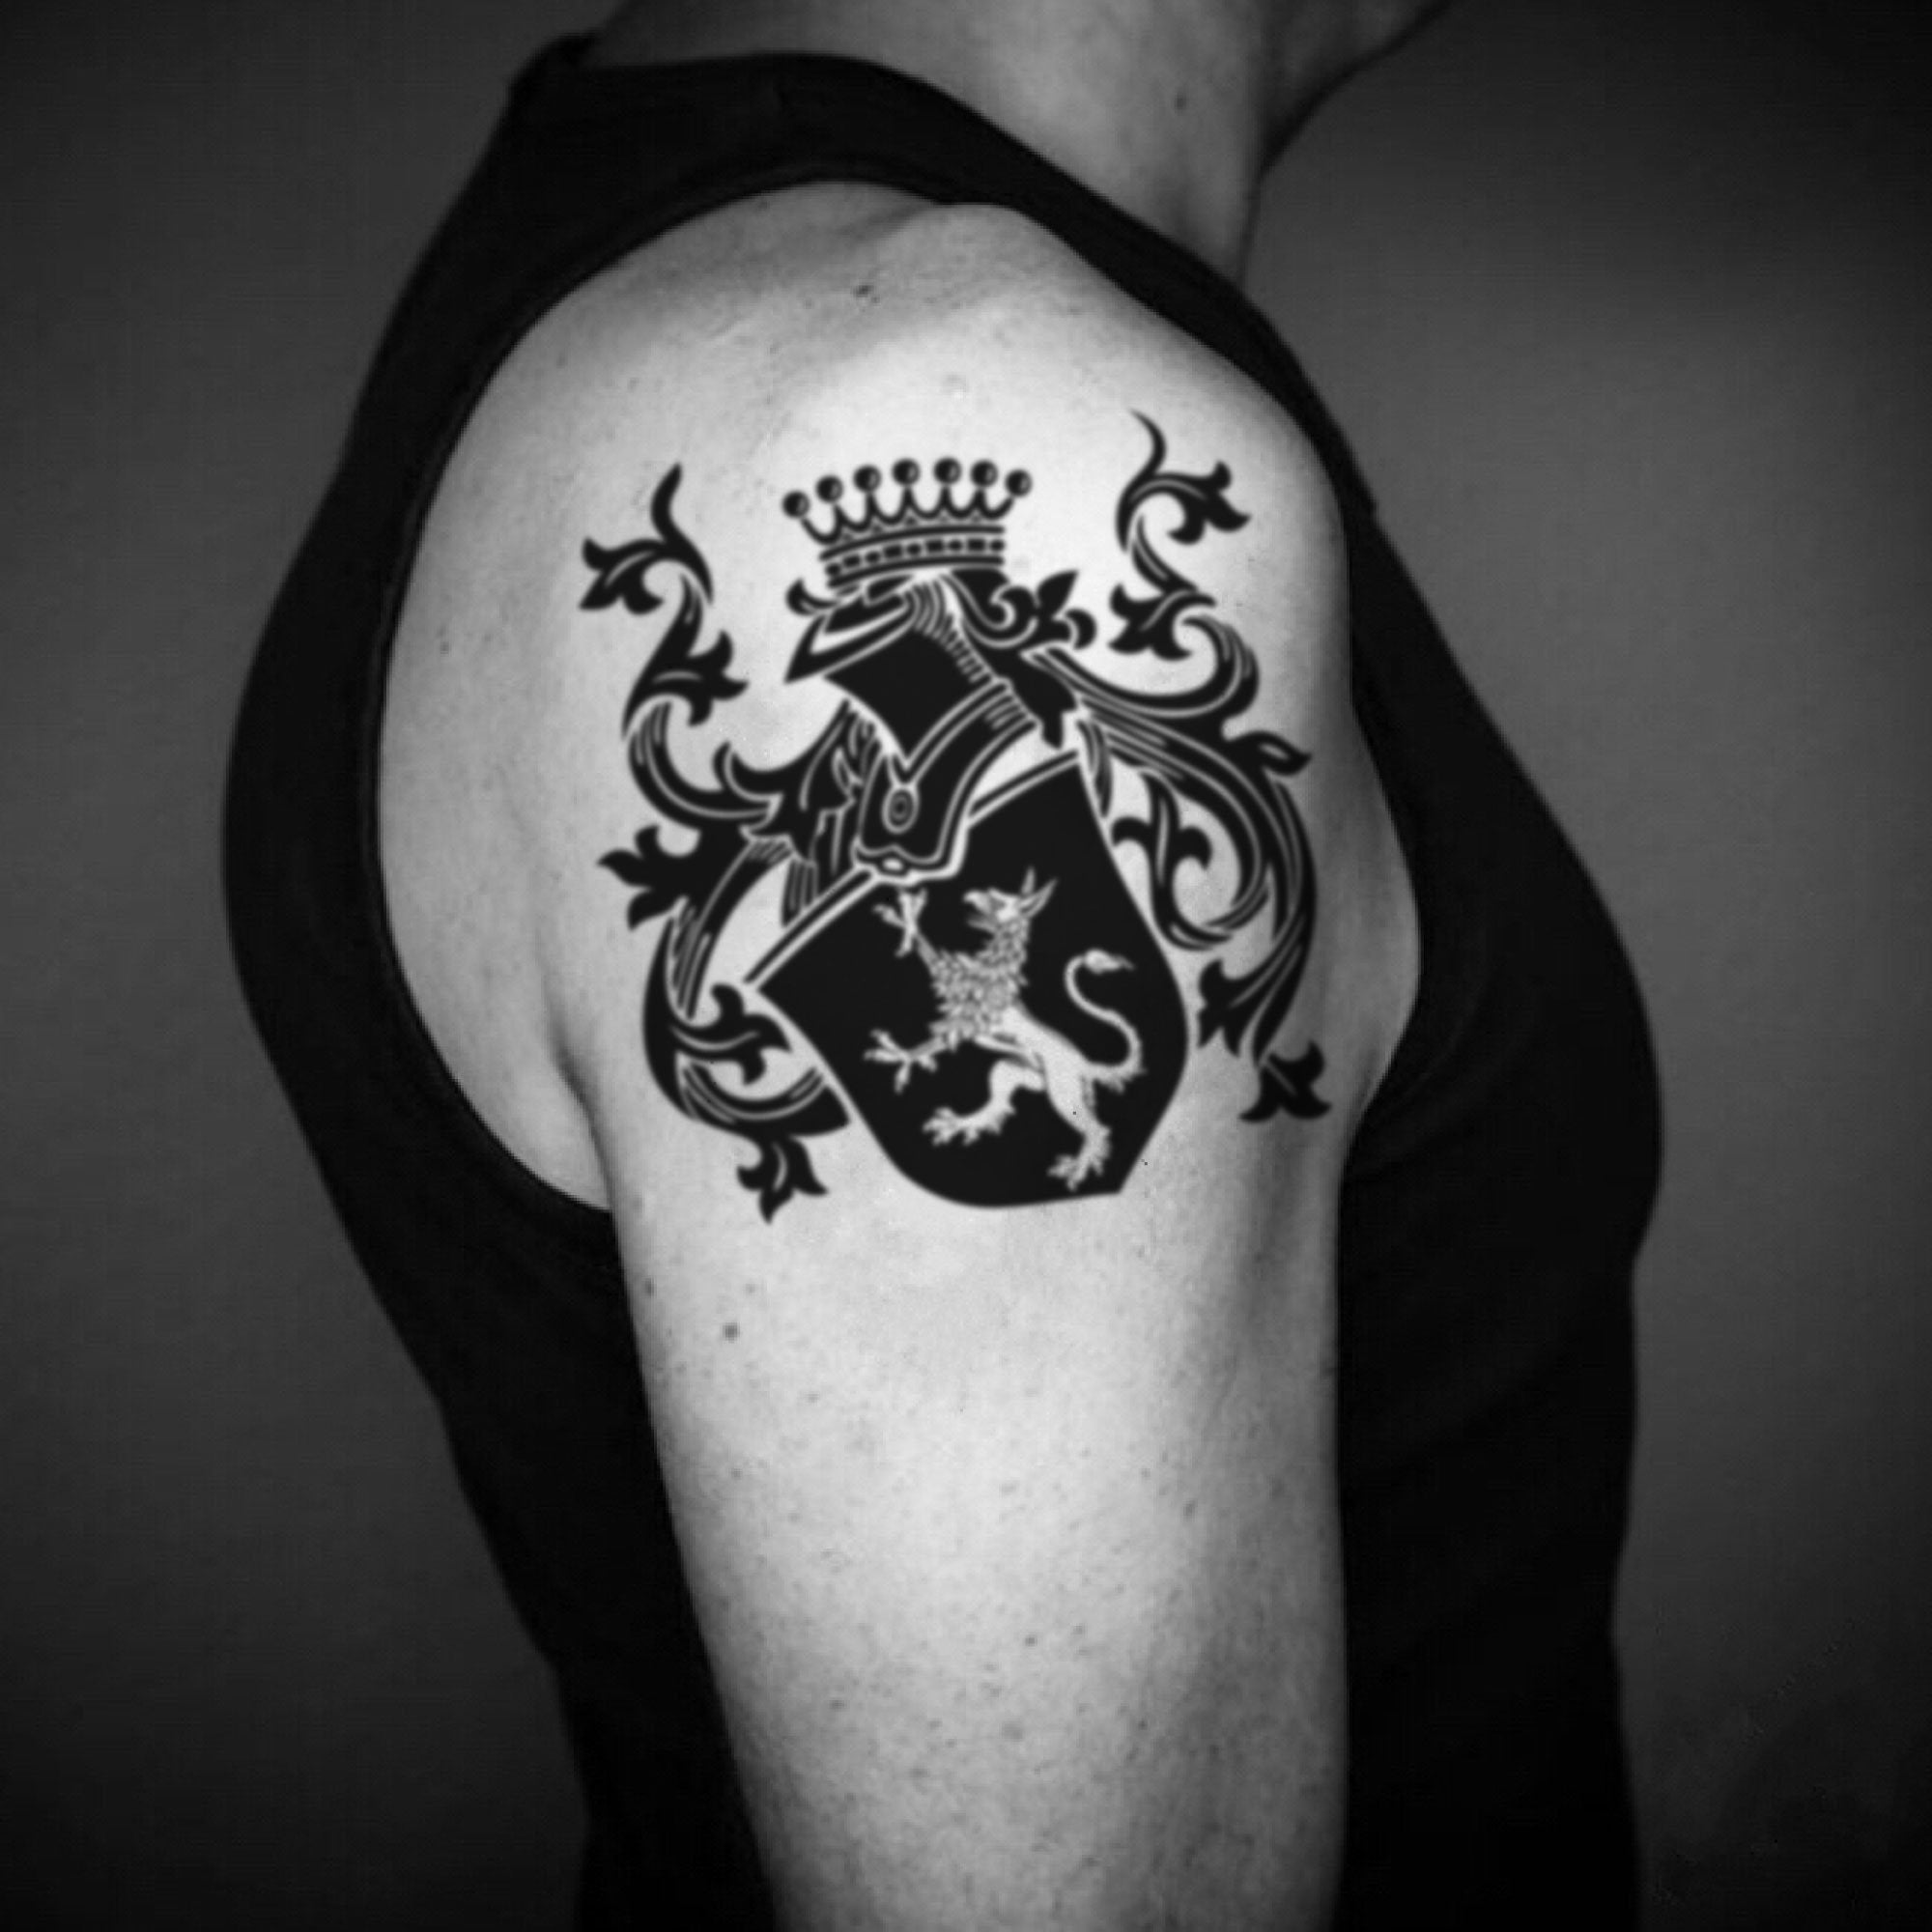 Family Crest Coat of Arms Temporary Tattoo Sticker - OhMyTat